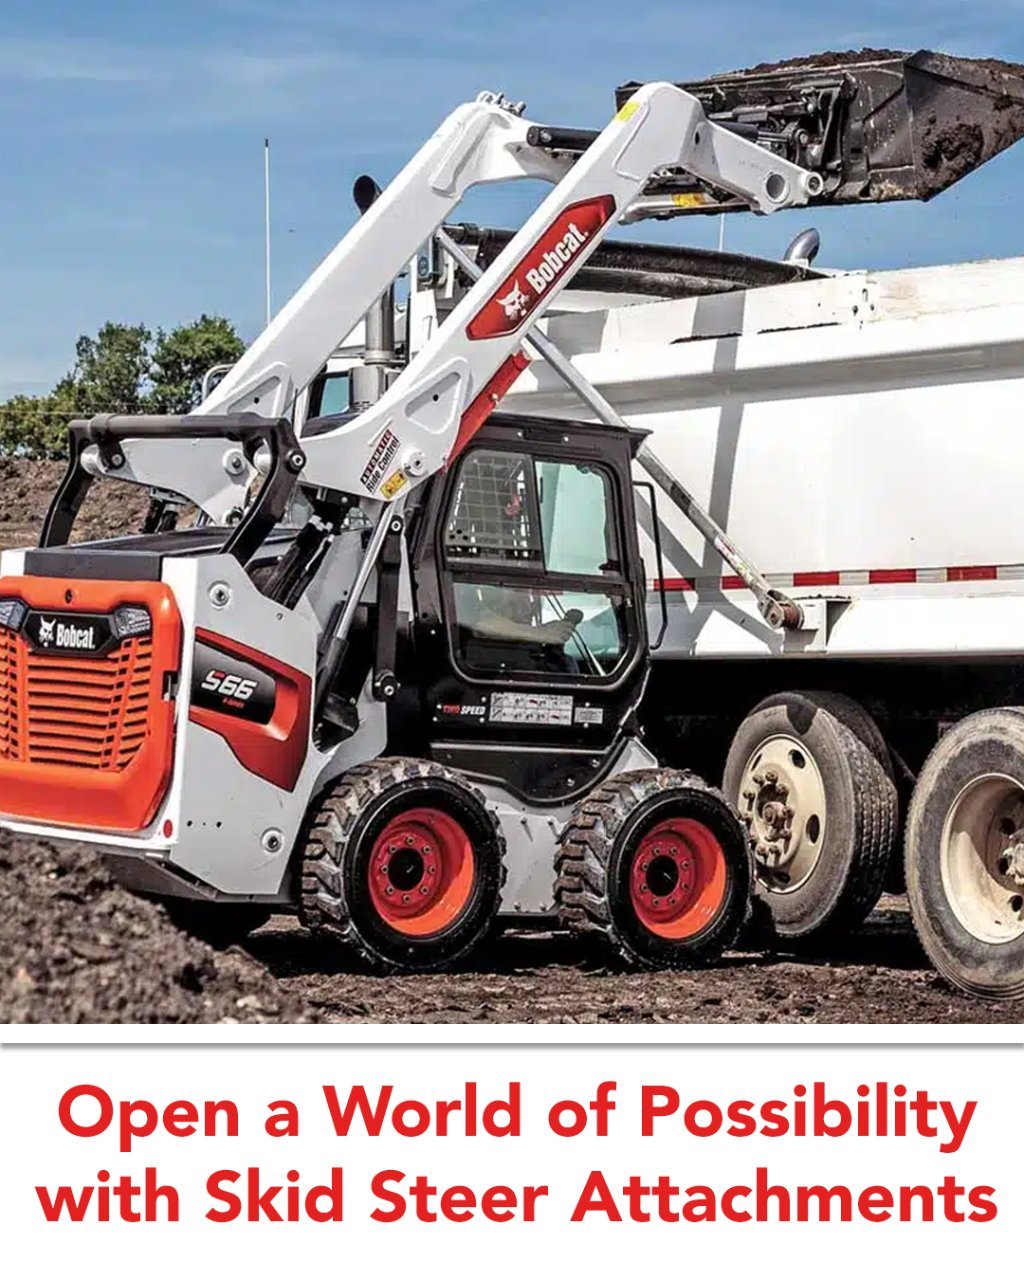 Discover our versatile range of @Bobcat Skid Steer Attachments, designed for seamless switching between tasks in just minutes! Whether you're in roadbuilding, agriculture, construction, or beyond, we have the perfect attachment to match your requirements. Dive into our latest blog on our website for comprehensive details, or connect with us directly to learn more!

#Bobcat #AnimalTough #BobcatEquipment #BobcatMachinery #BobcatAttachments #Attachments #SkidSteer #BobcatSkidSteer #ConstructionEquipment #LandscapingEquipment #RoadworksAttachments